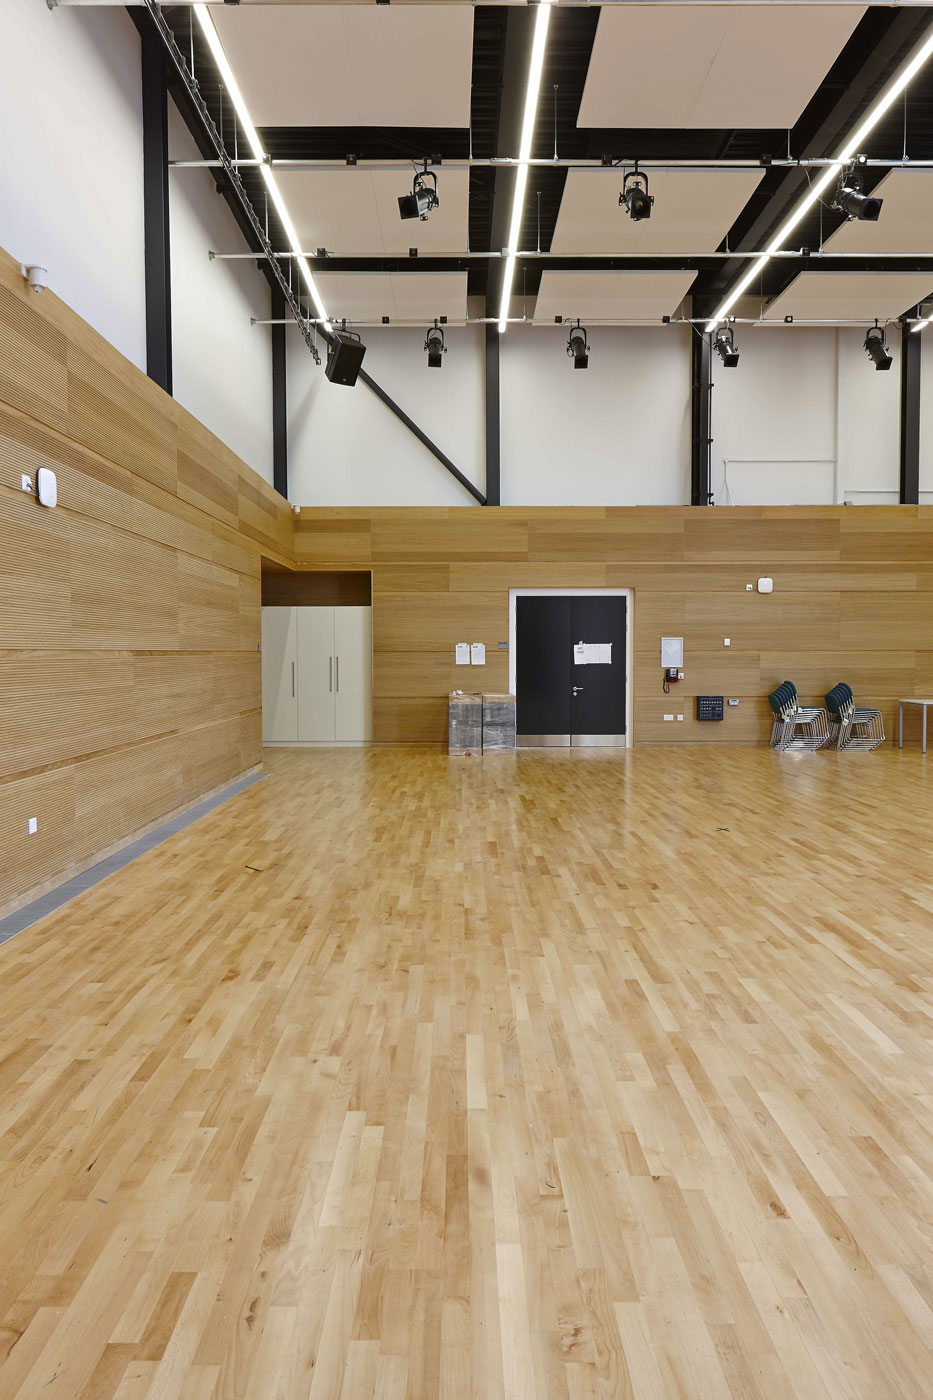 University Square Stratford Dance Room | Interior Architecture Photography | Commercial Buildings Photographer